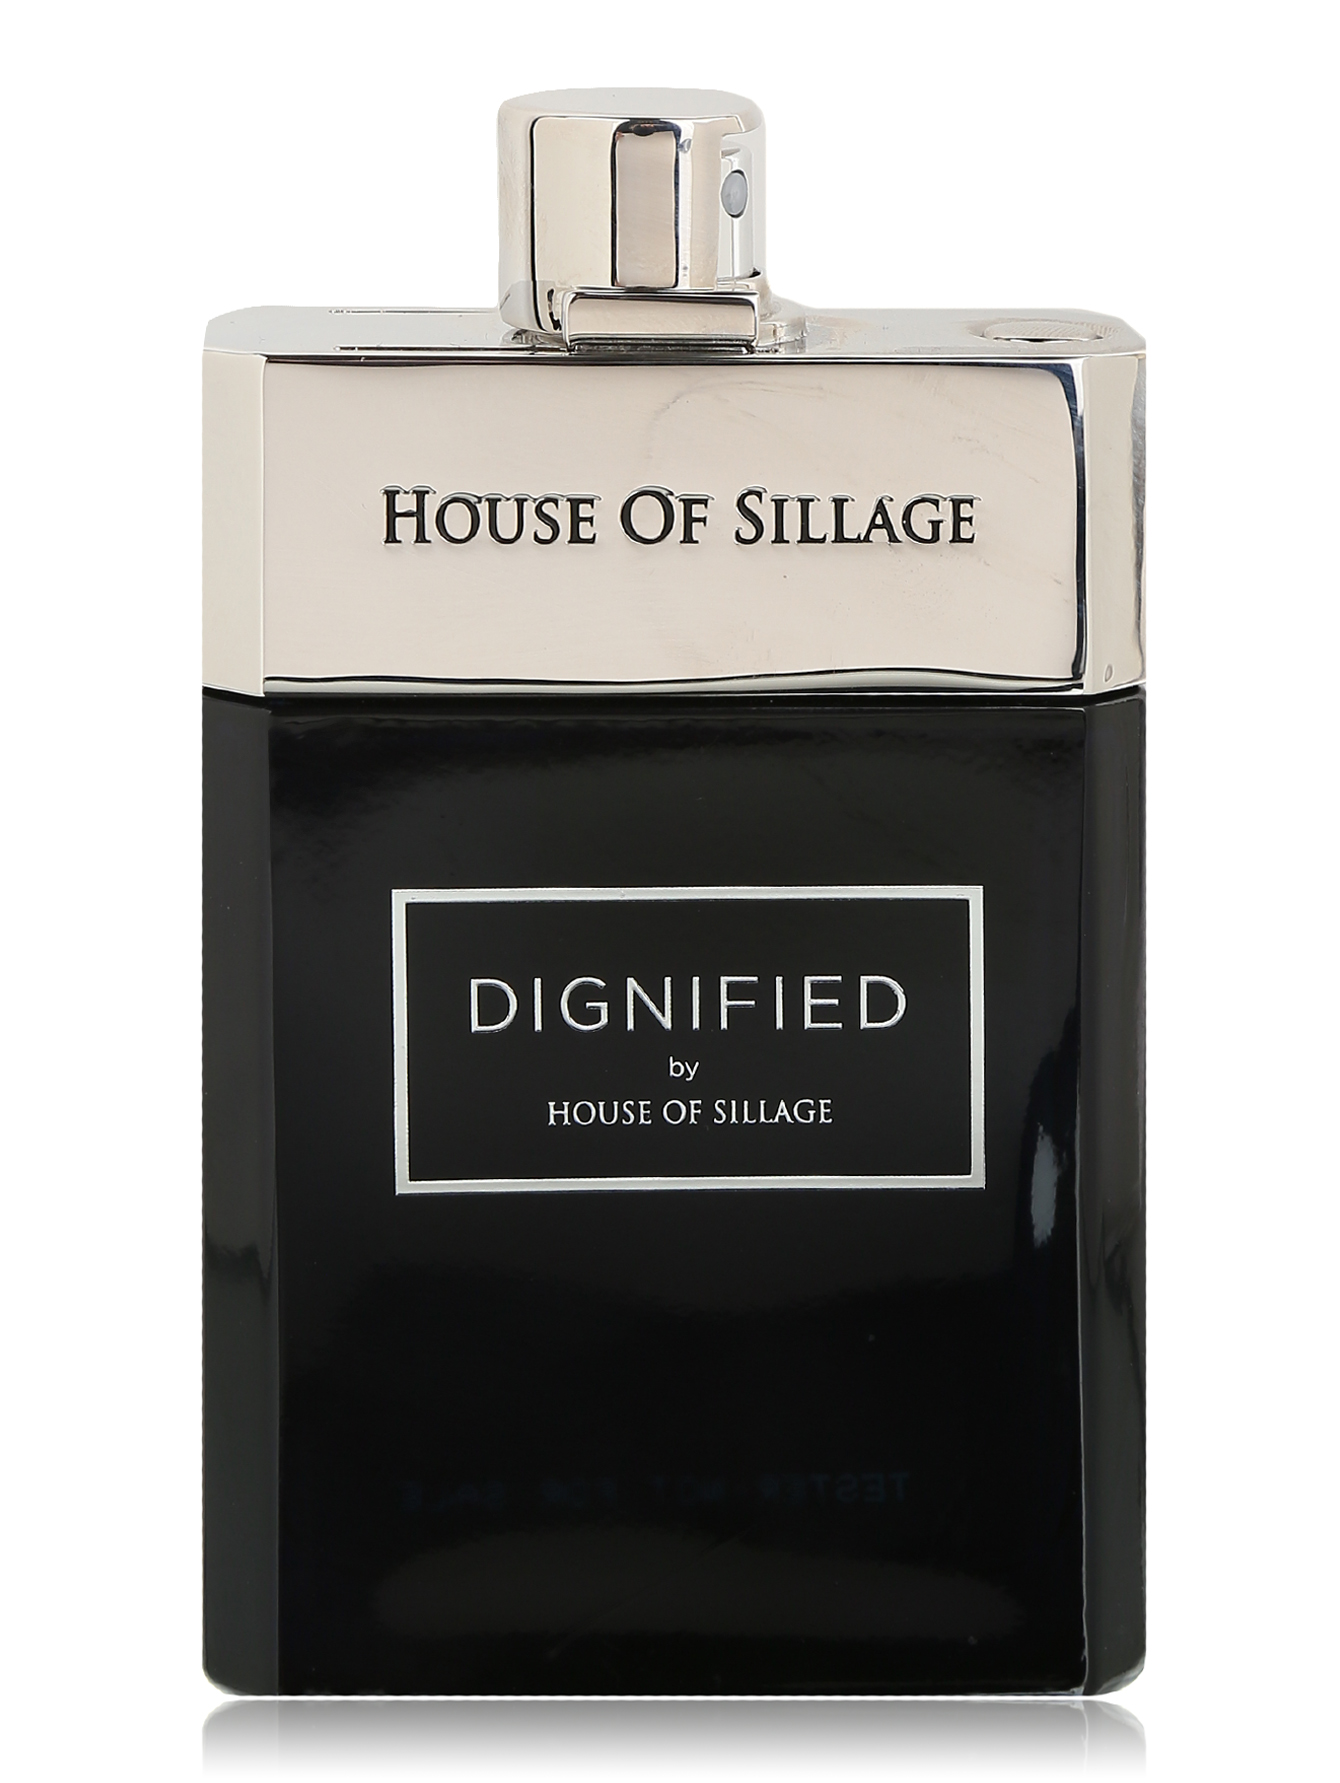 Dignified. House of Sillage dignified. Dignified Парфюм. Парфюм dignified мужской. Силадж духи.